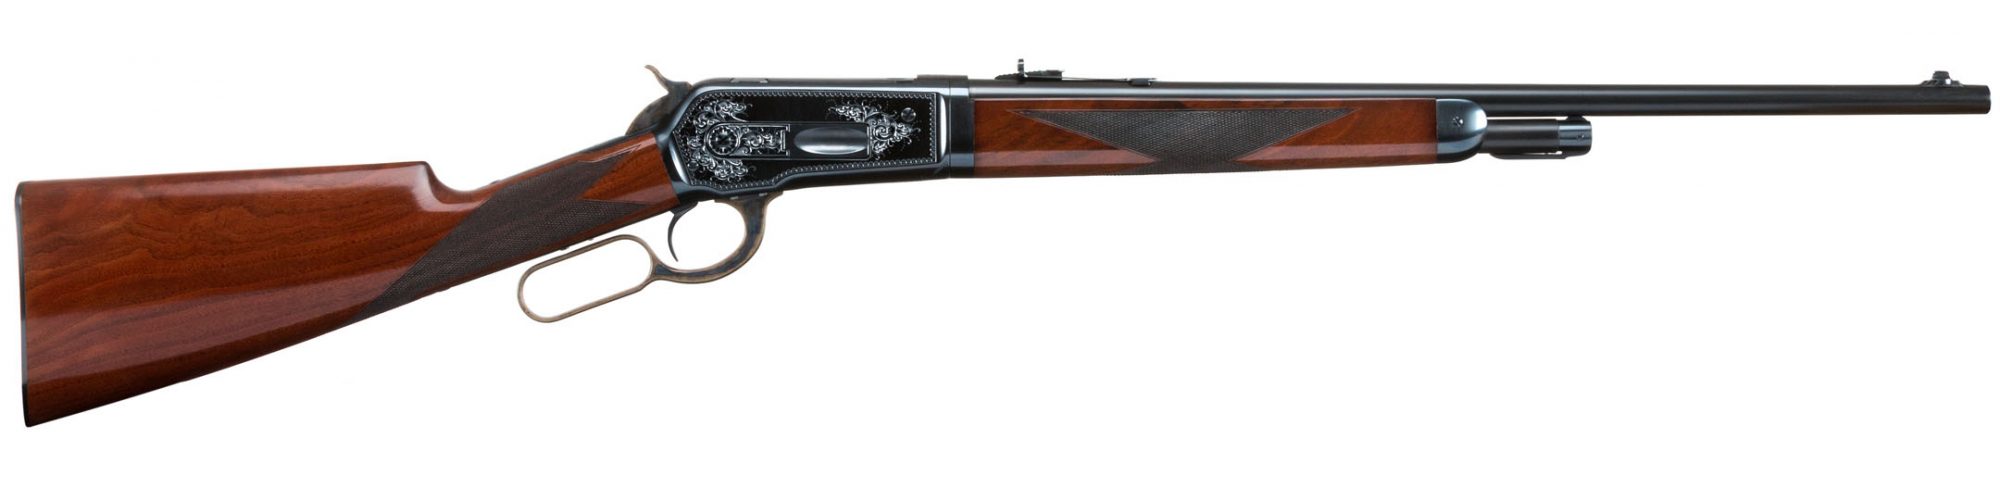 Winchester Model 1886 in 45-70 Gov't from 1898, after restoration work performed by Turnbull Restoration of Bloomfield, NY